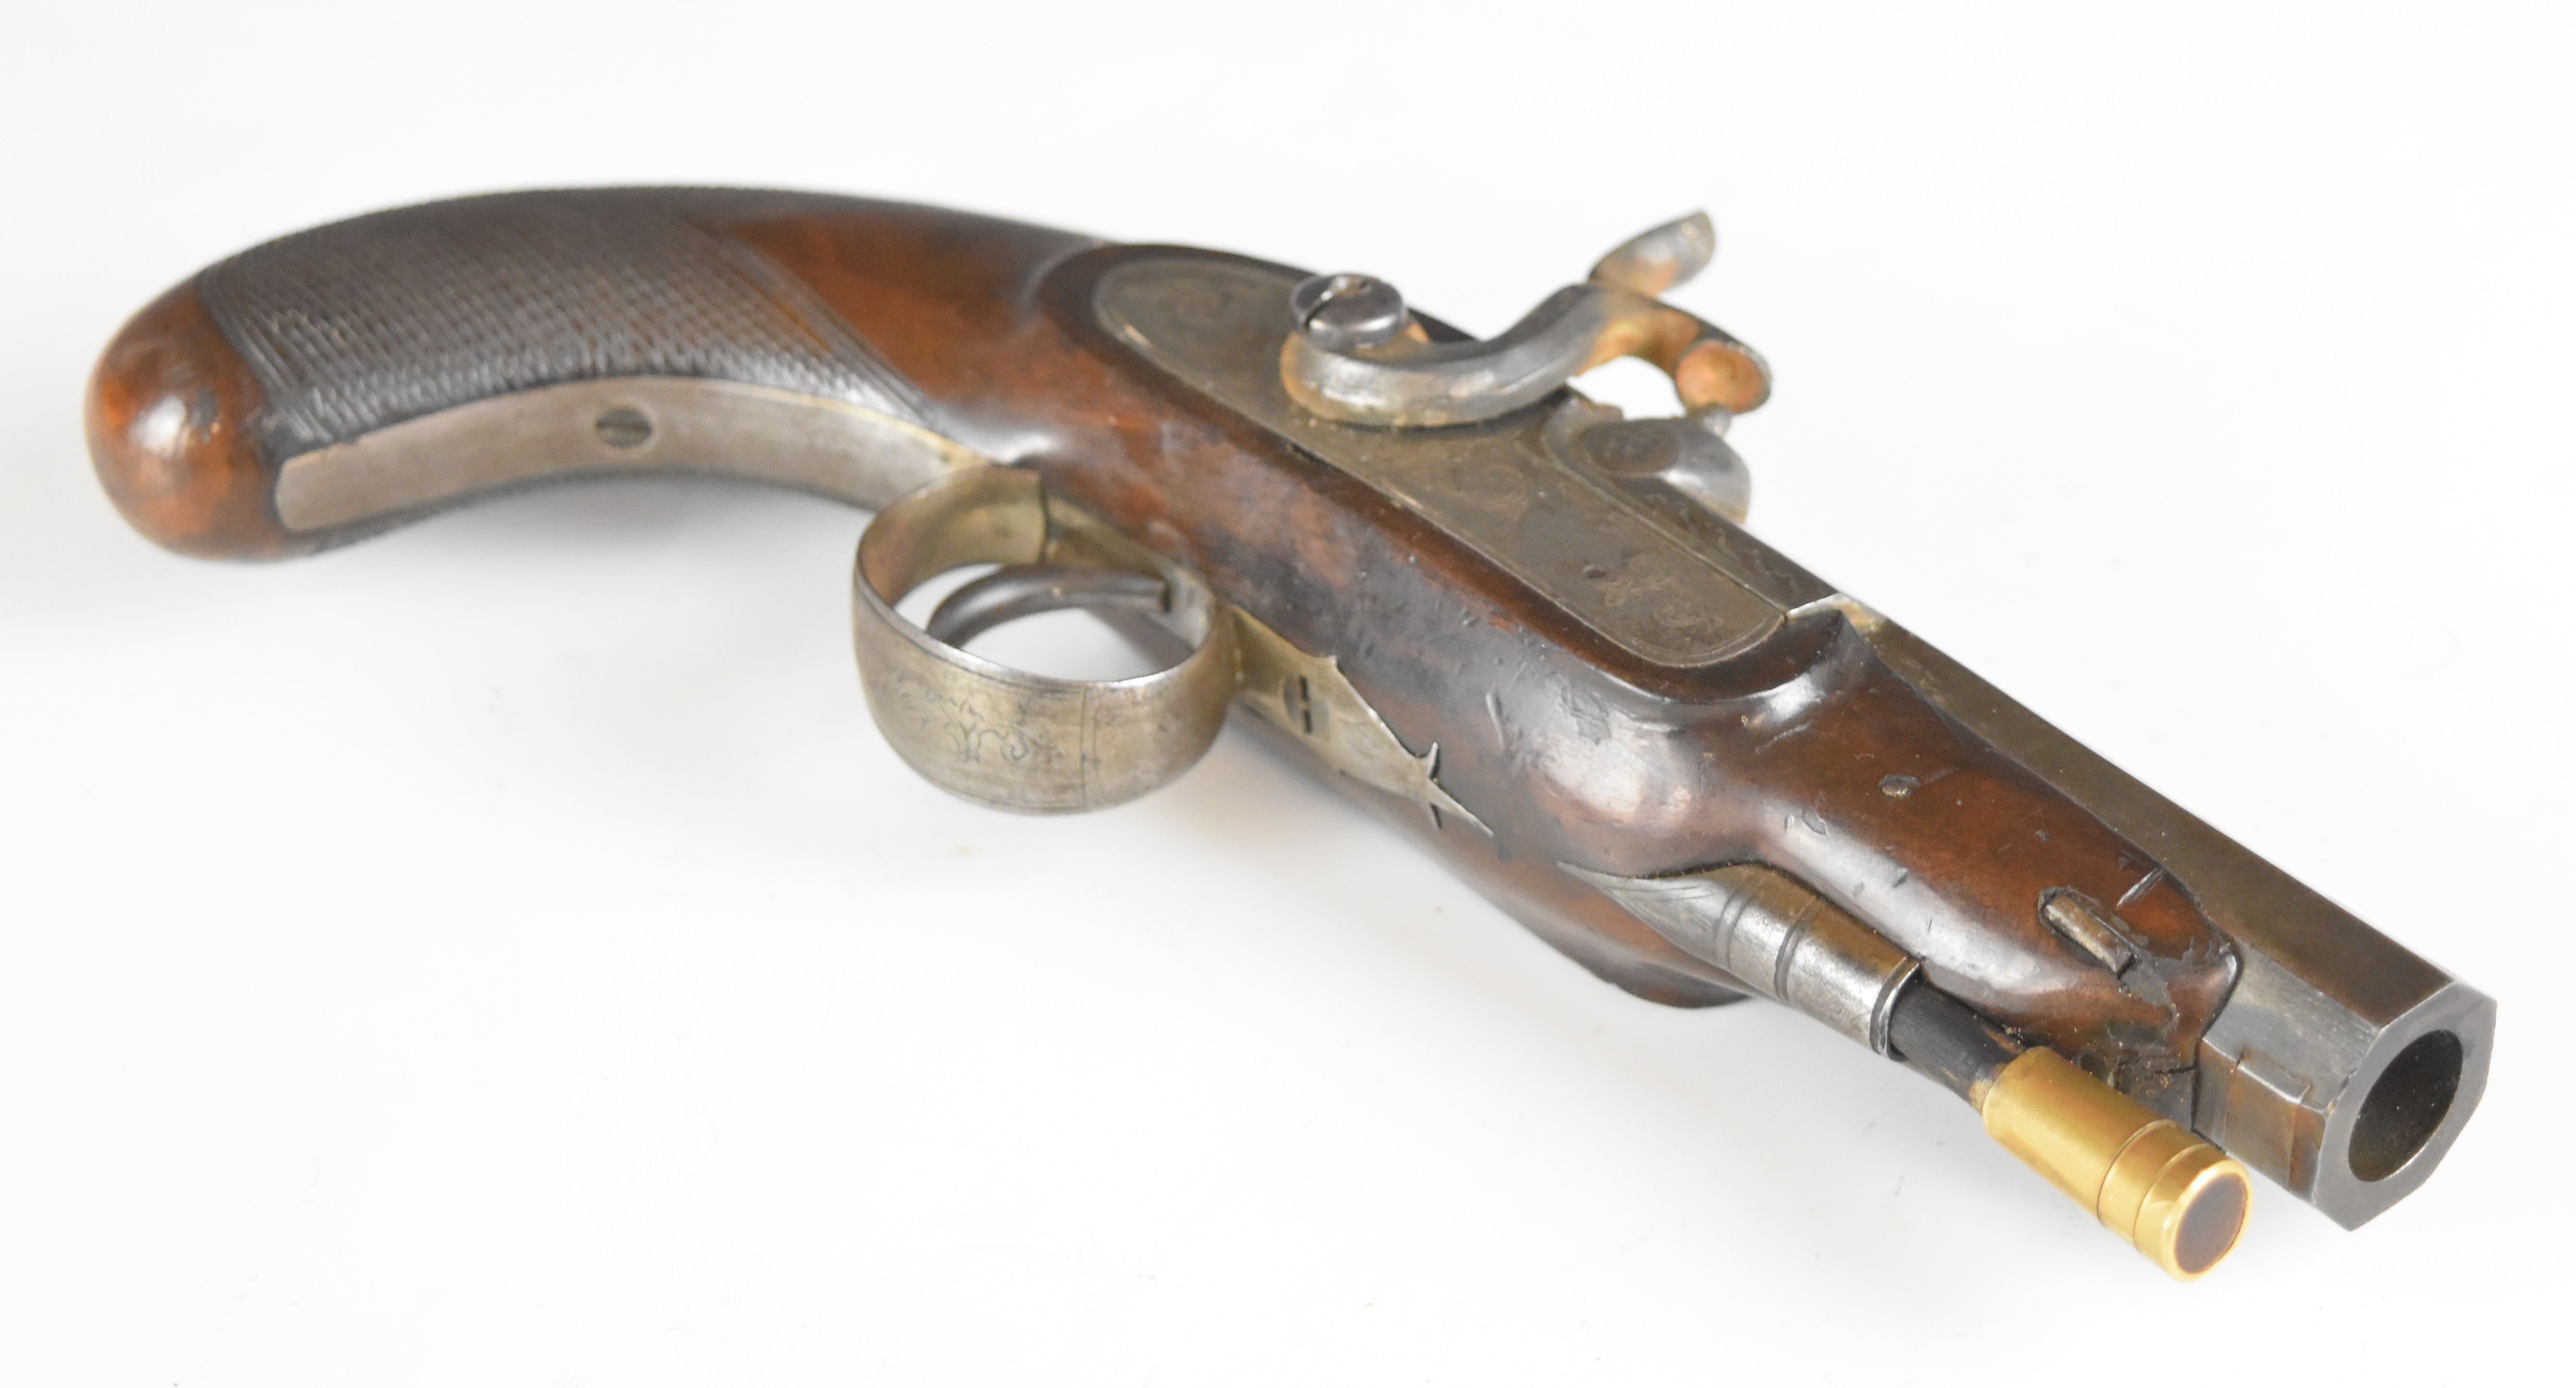 Bentley of London 36 bore percussion hammer action coat pistol with engraved lock, hammer, trigger - Image 4 of 10